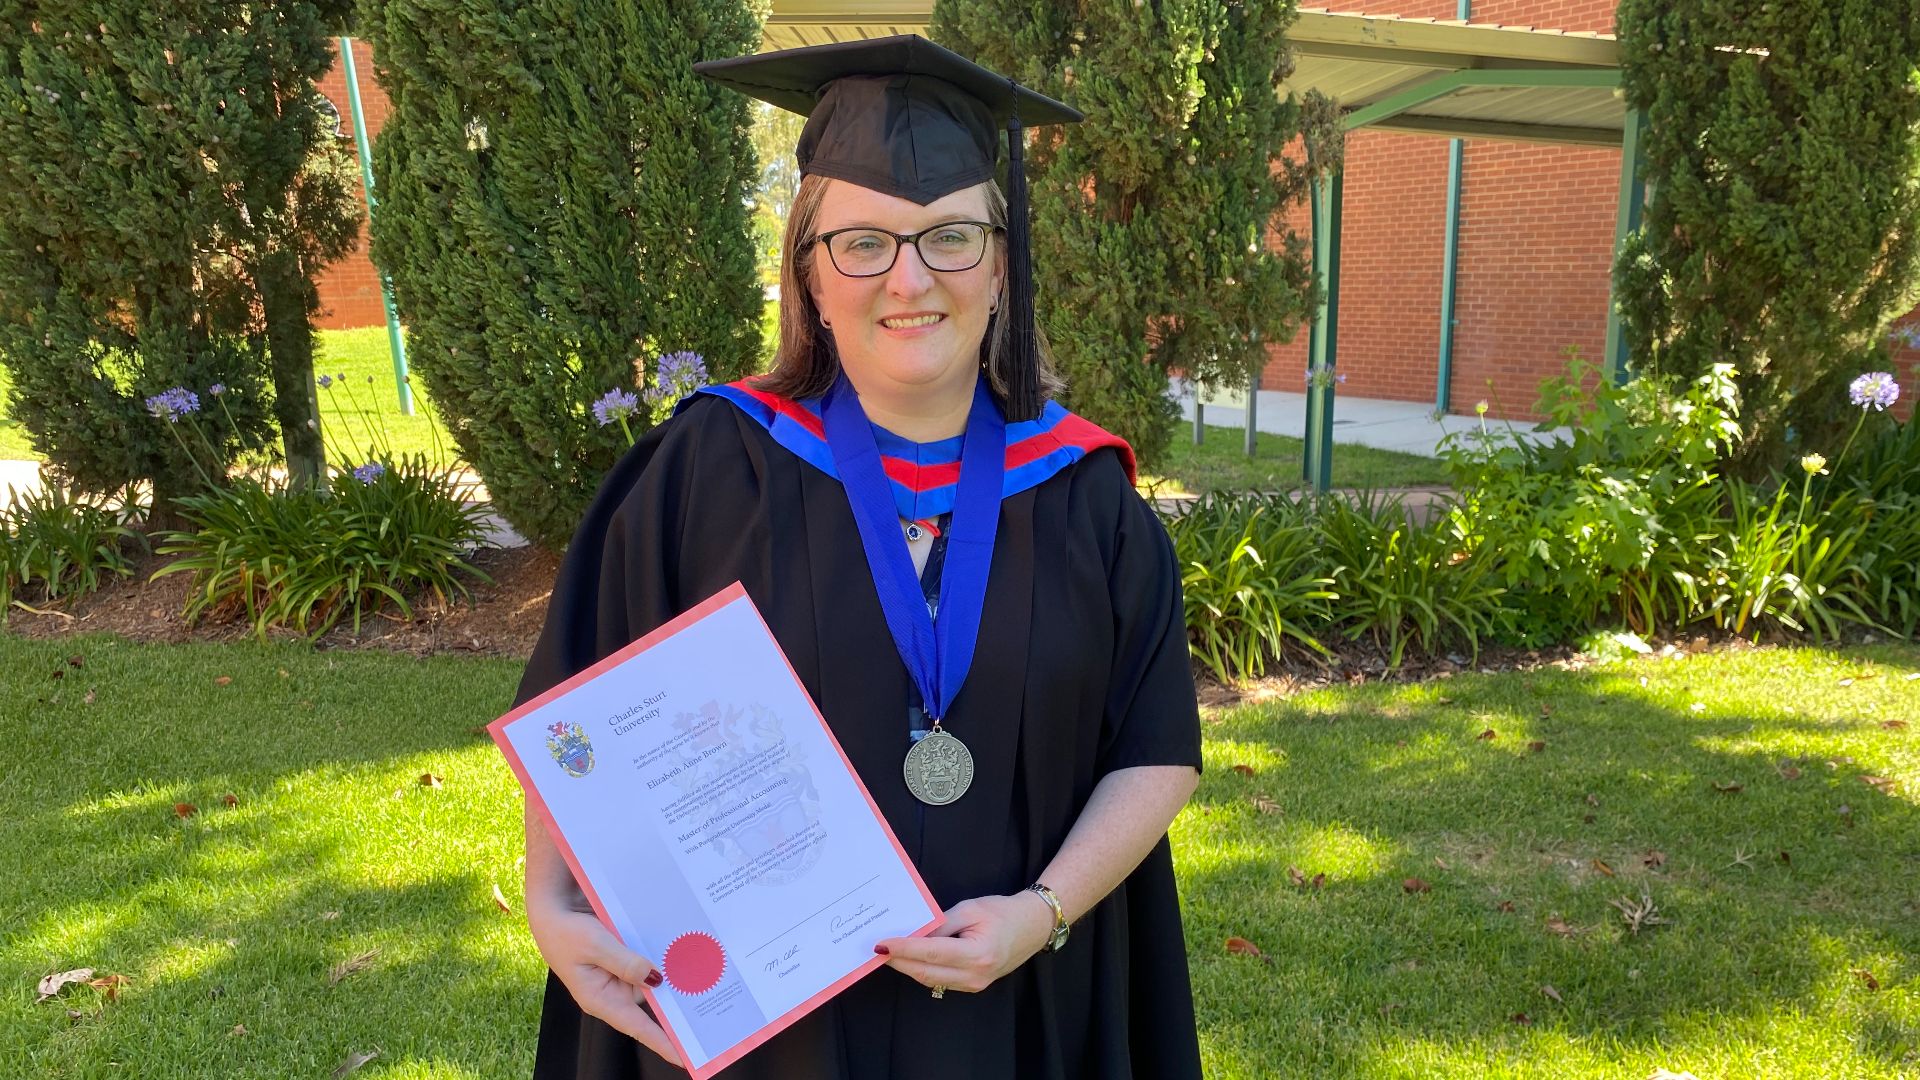 Calculated to near perfection. Wagga Wagga mother awarded for outstanding academic achievement